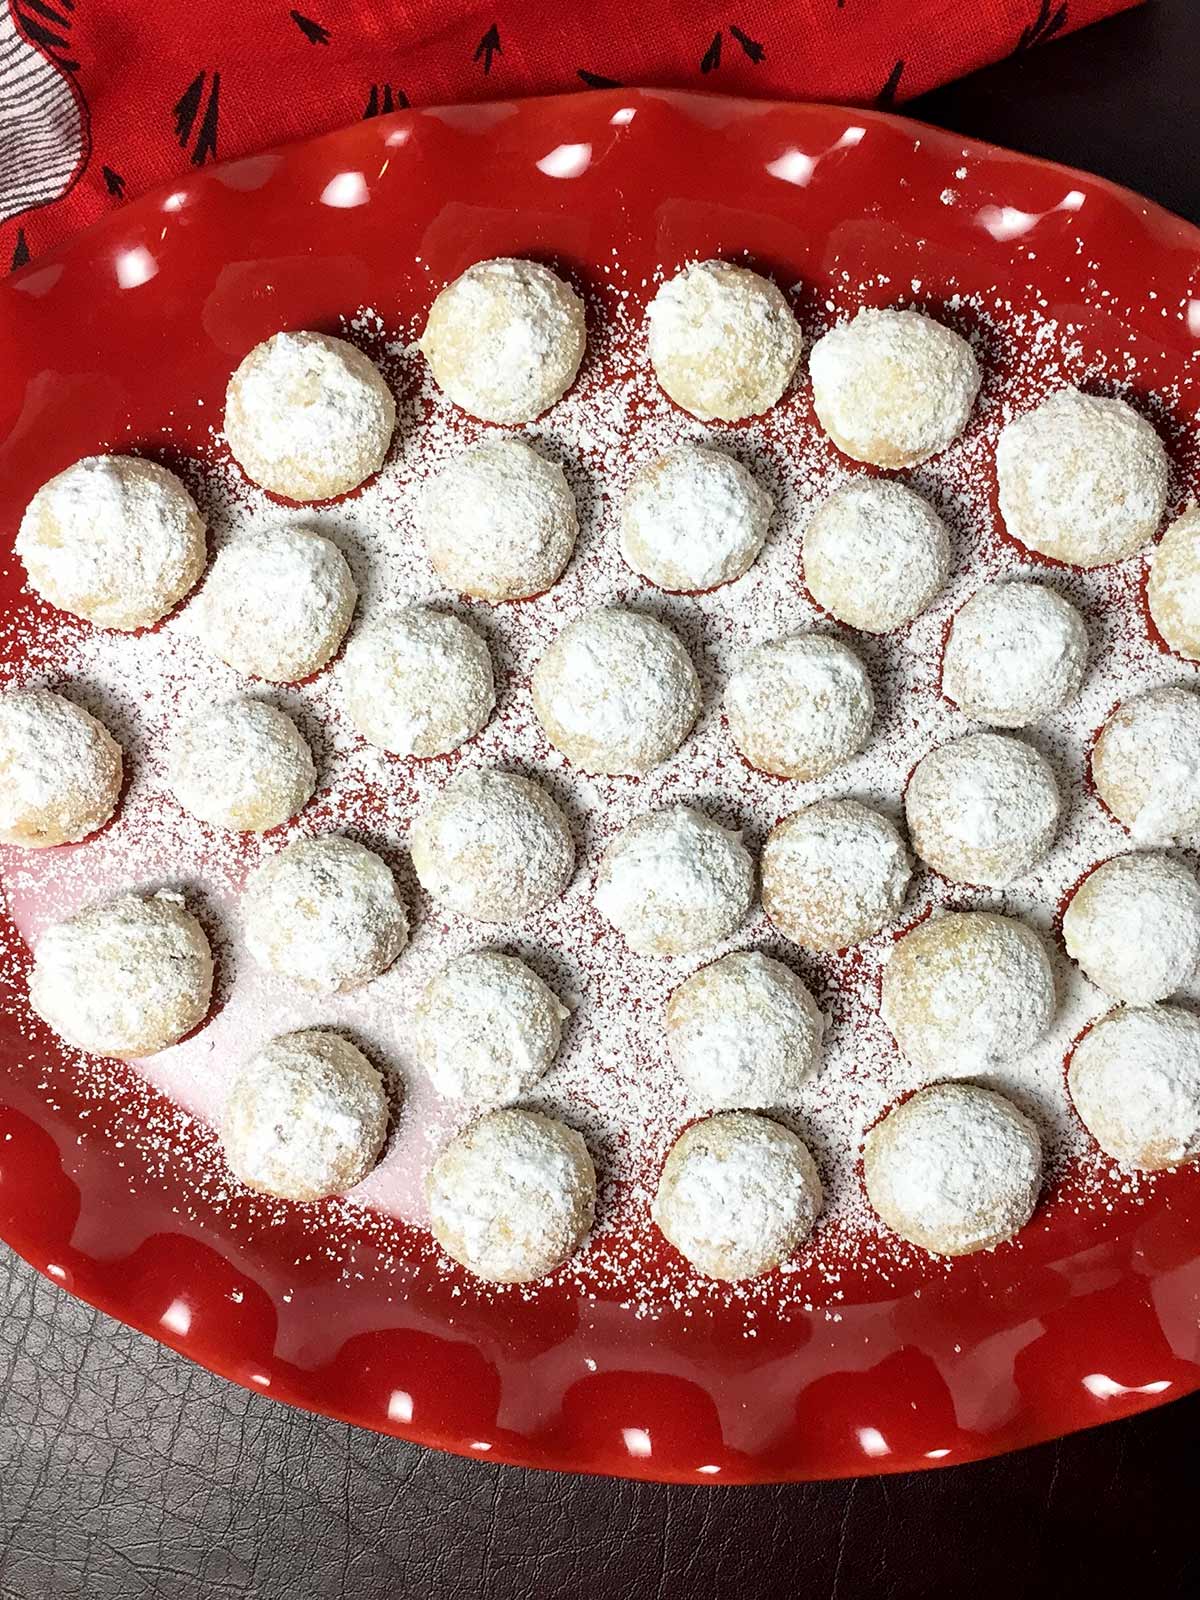 Pistachio snowballs on a red platter with second dusting of powdered sugar on them.